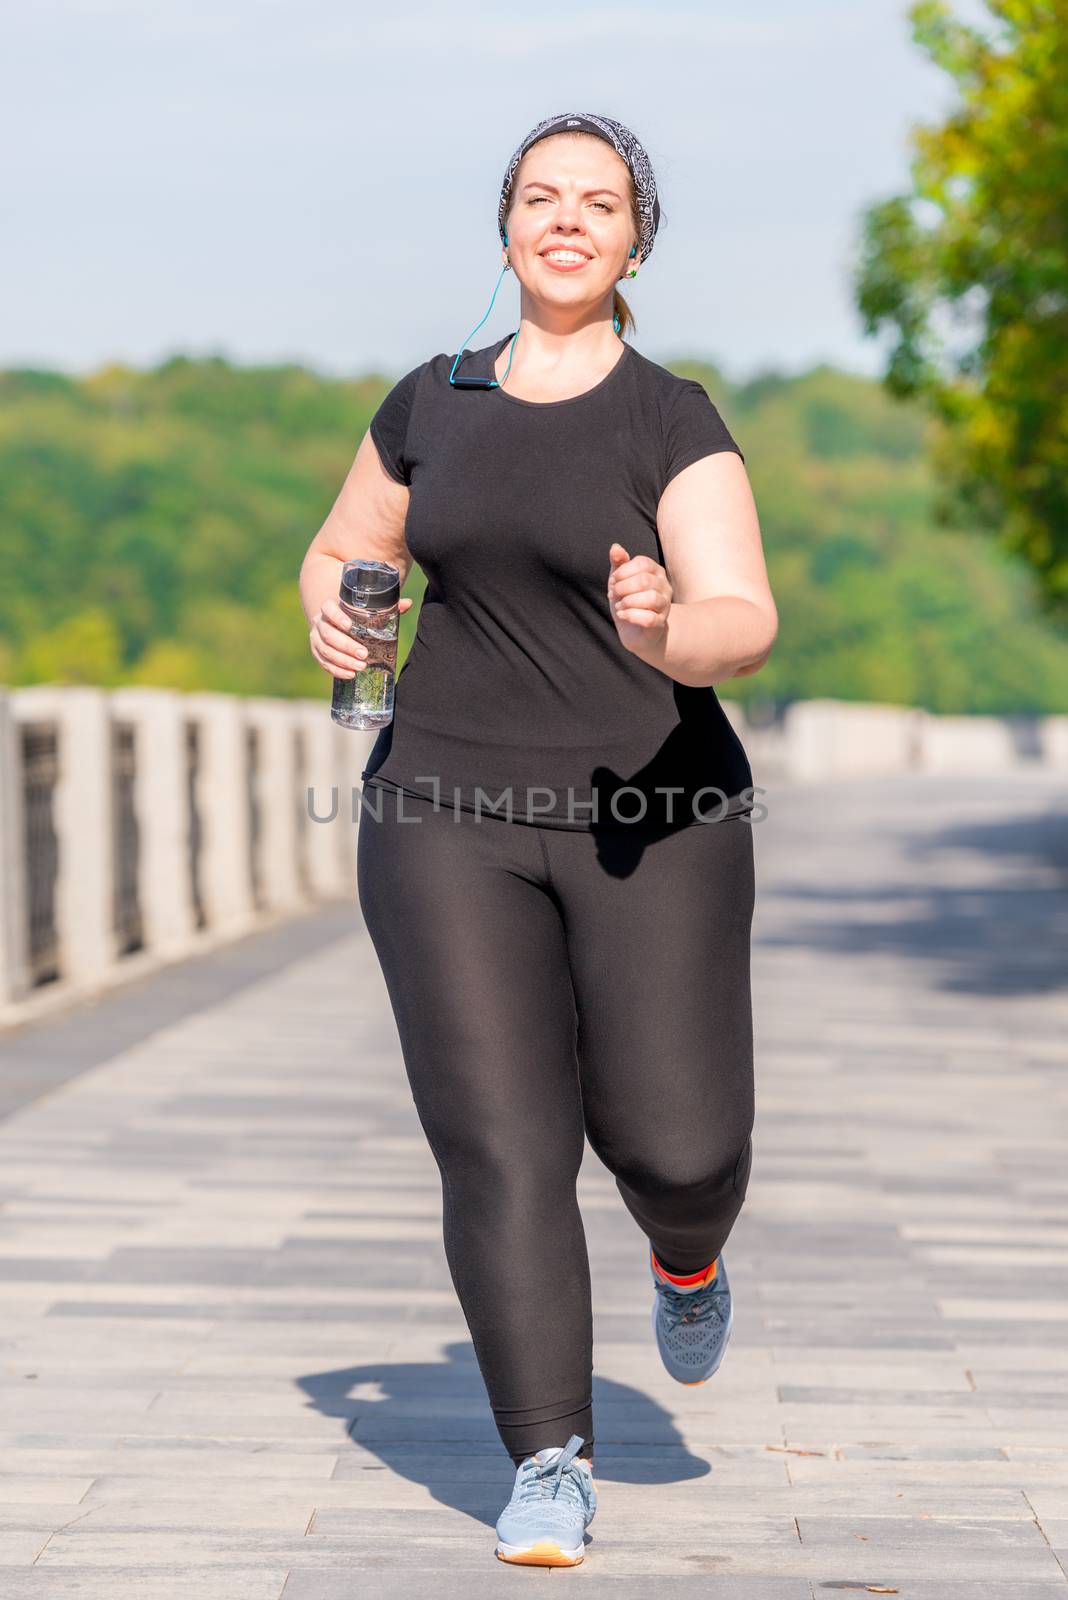 plus size woman with a bottle of water during her morning jog in by kosmsos111